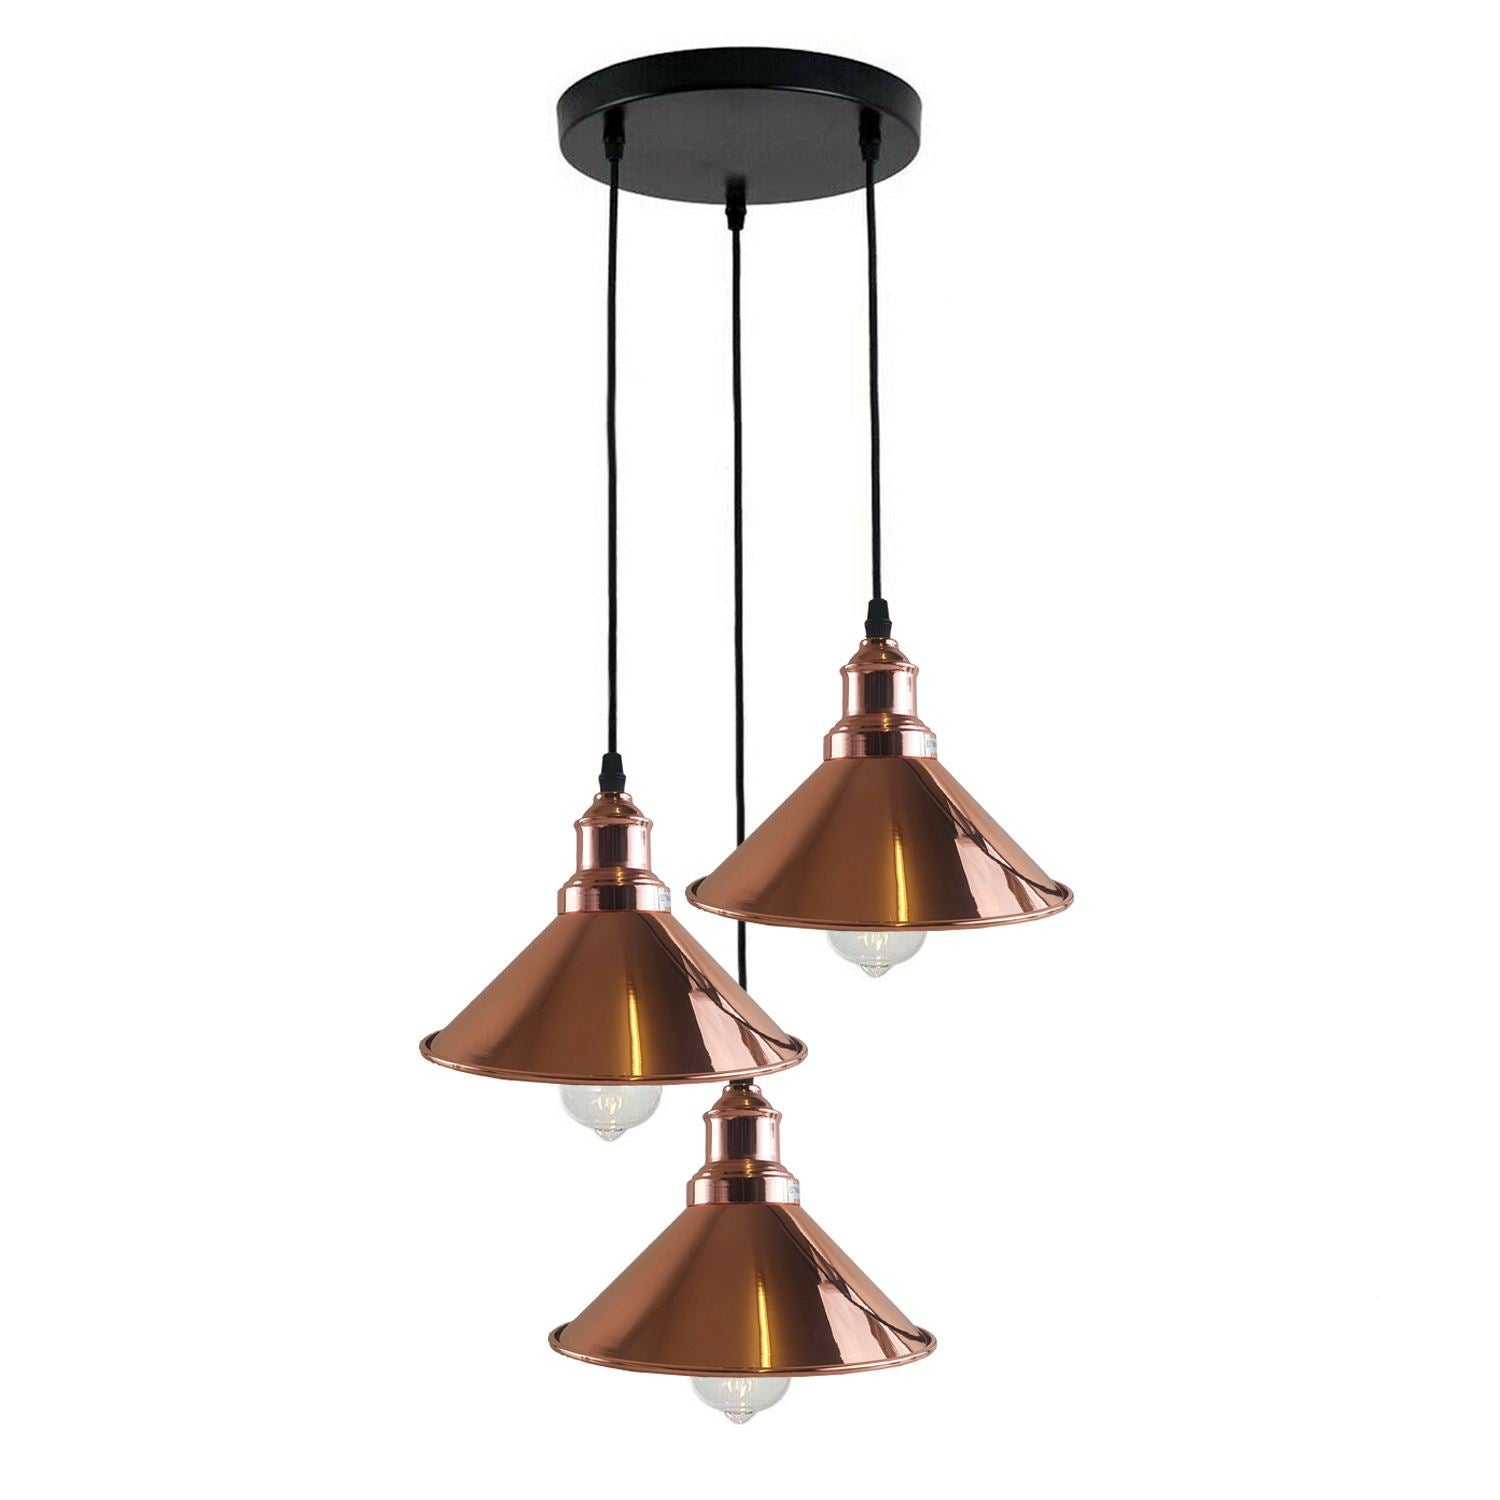 3 Head Ceiling Light, Multi Color Cluster Ceiling Hanging Lamp, Pendant Light Fixture with Cone Metal Shade~1302 - LEDSone UK Ltd